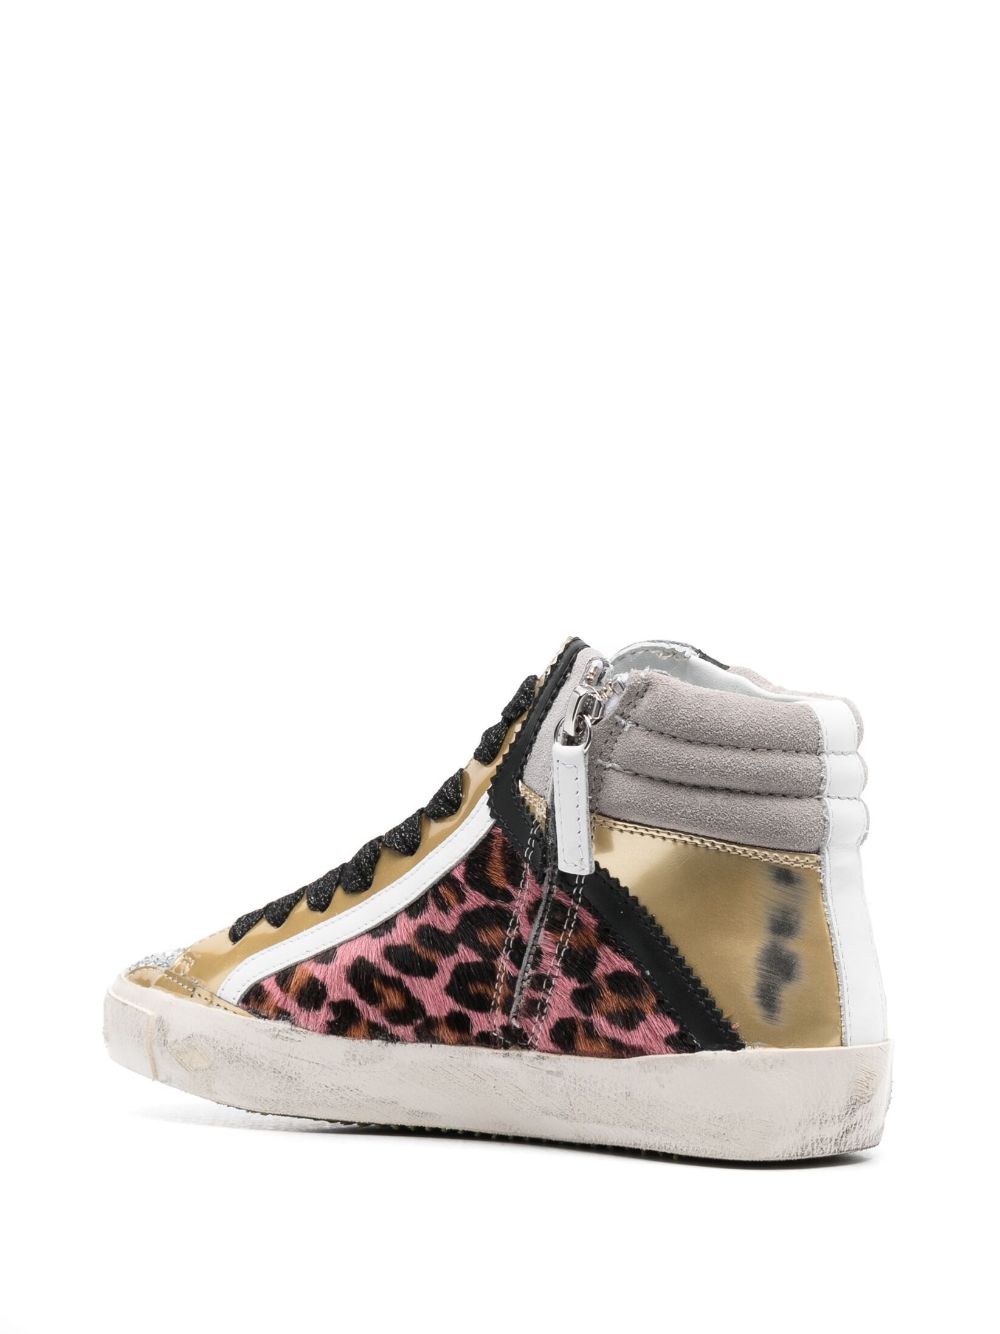 Philippe Model Paris leopard-print Panelled Leather Sneakers - Farfetch